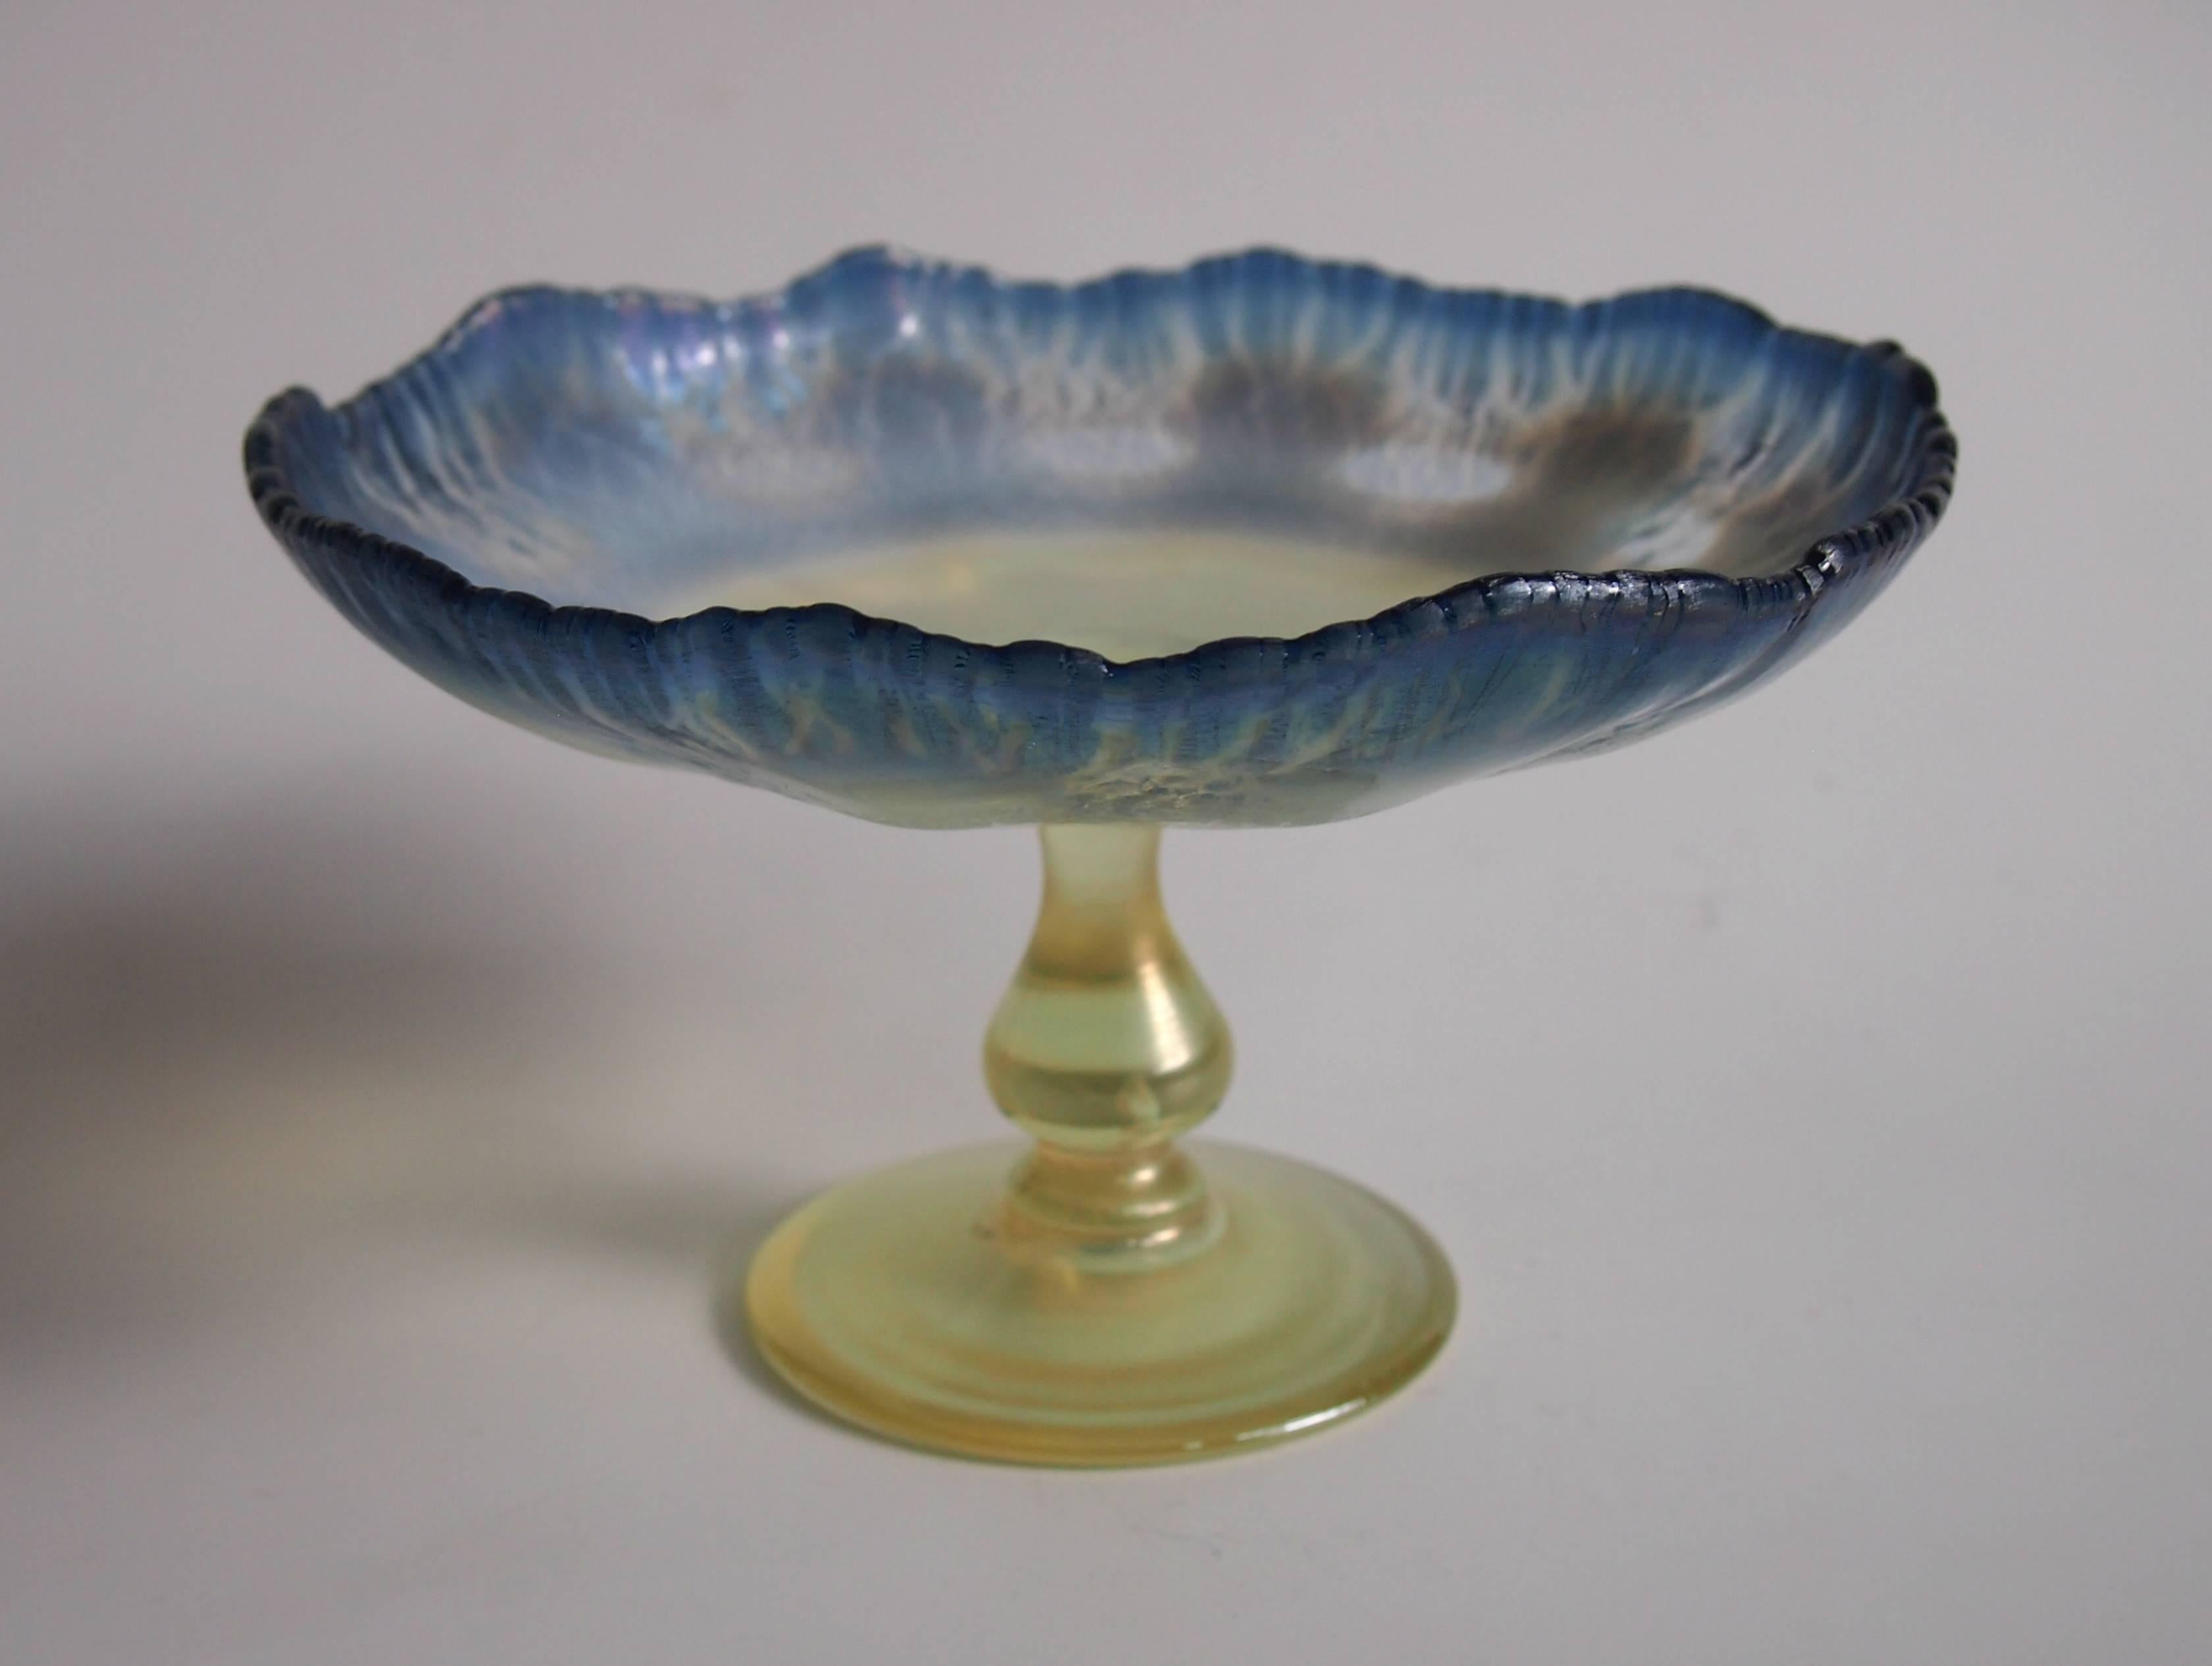 A very fine Louis comfort Tiffany blue and opal Pastel Favrile Compote/Tazza with a yellow knopped stem and foot. Beautifully signed 'L.C.Tiffany Favrile' -on the base. See picture 6. The blue edge is classic tiffany onion skin transitioning to the